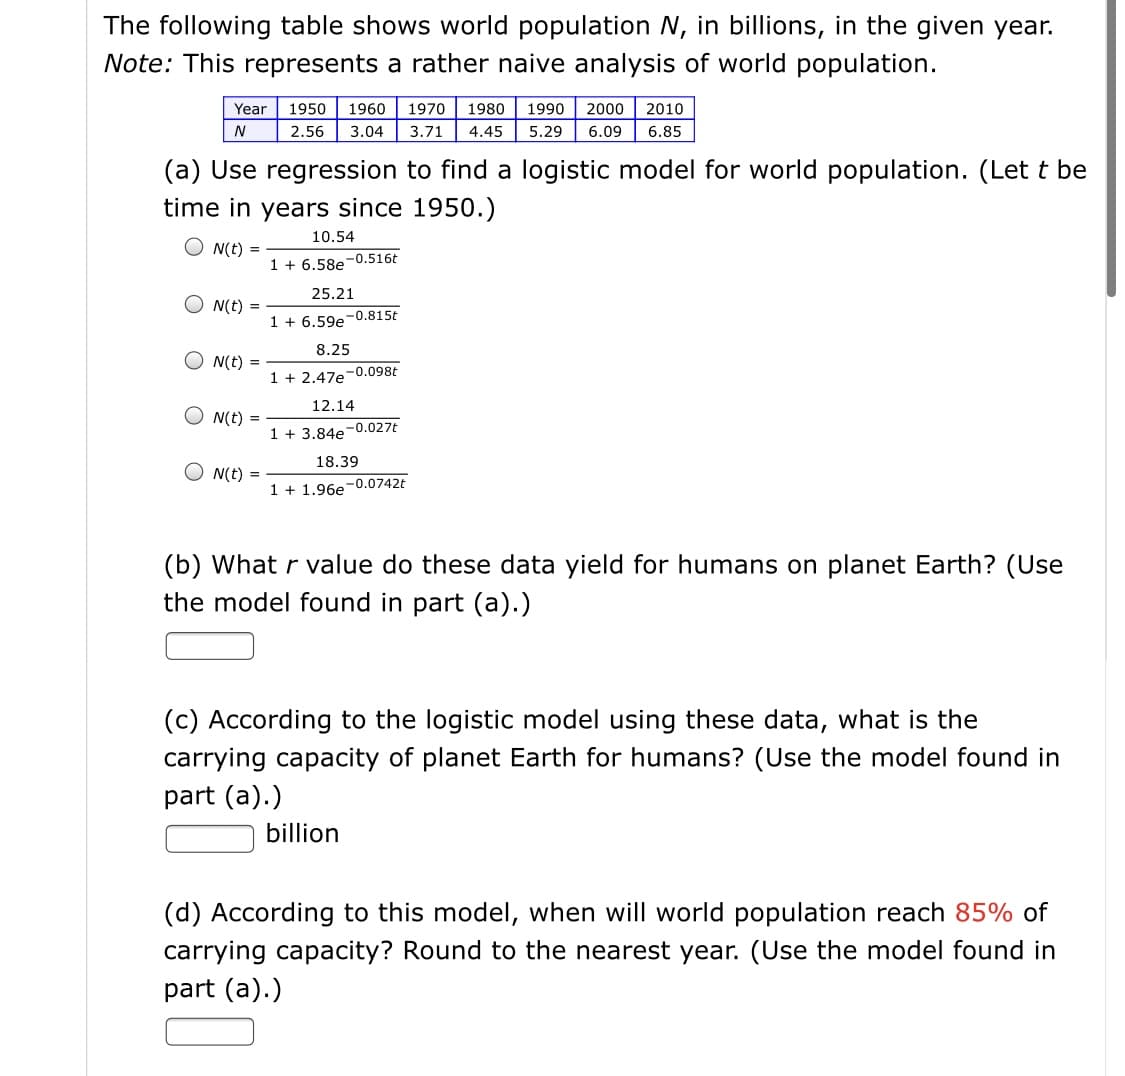 The following table shows world population N, in billions, in the given year.
Note: This represents a rather naive analysis of world population.
Year
1950
1960
1970
1980
1990
2000
2010
N
2.56
3.04
3.71
4.45
5.29
6.09
6.85
(a) Use regression to find a logistic model for world population. (Let t be
time in years since 1950.)
10.54
O N(t) =
1 + 6.58e-0.516t
25.21
N(t) =
1 + 6.59e-0.815t
8.25
N(t) =
1 + 2.47e-0.098t
12.14
N(t) =
1 + 3.84e-0.027t
18.39
O N(t) =
1 + 1.96e-0.0742t
(b) What r value do these data yield for humans on planet Earth? (Use
the model found in part (a).)
(c) According to the logistic model using these data, what is the
carrying capacity of planet Earth for humans? (Use the model found in
part (a).)
billion
(d) According to this model, when will world population reach 85% of
carrying capacity? Round to the nearest year. (Use the model found in
part (a).)
